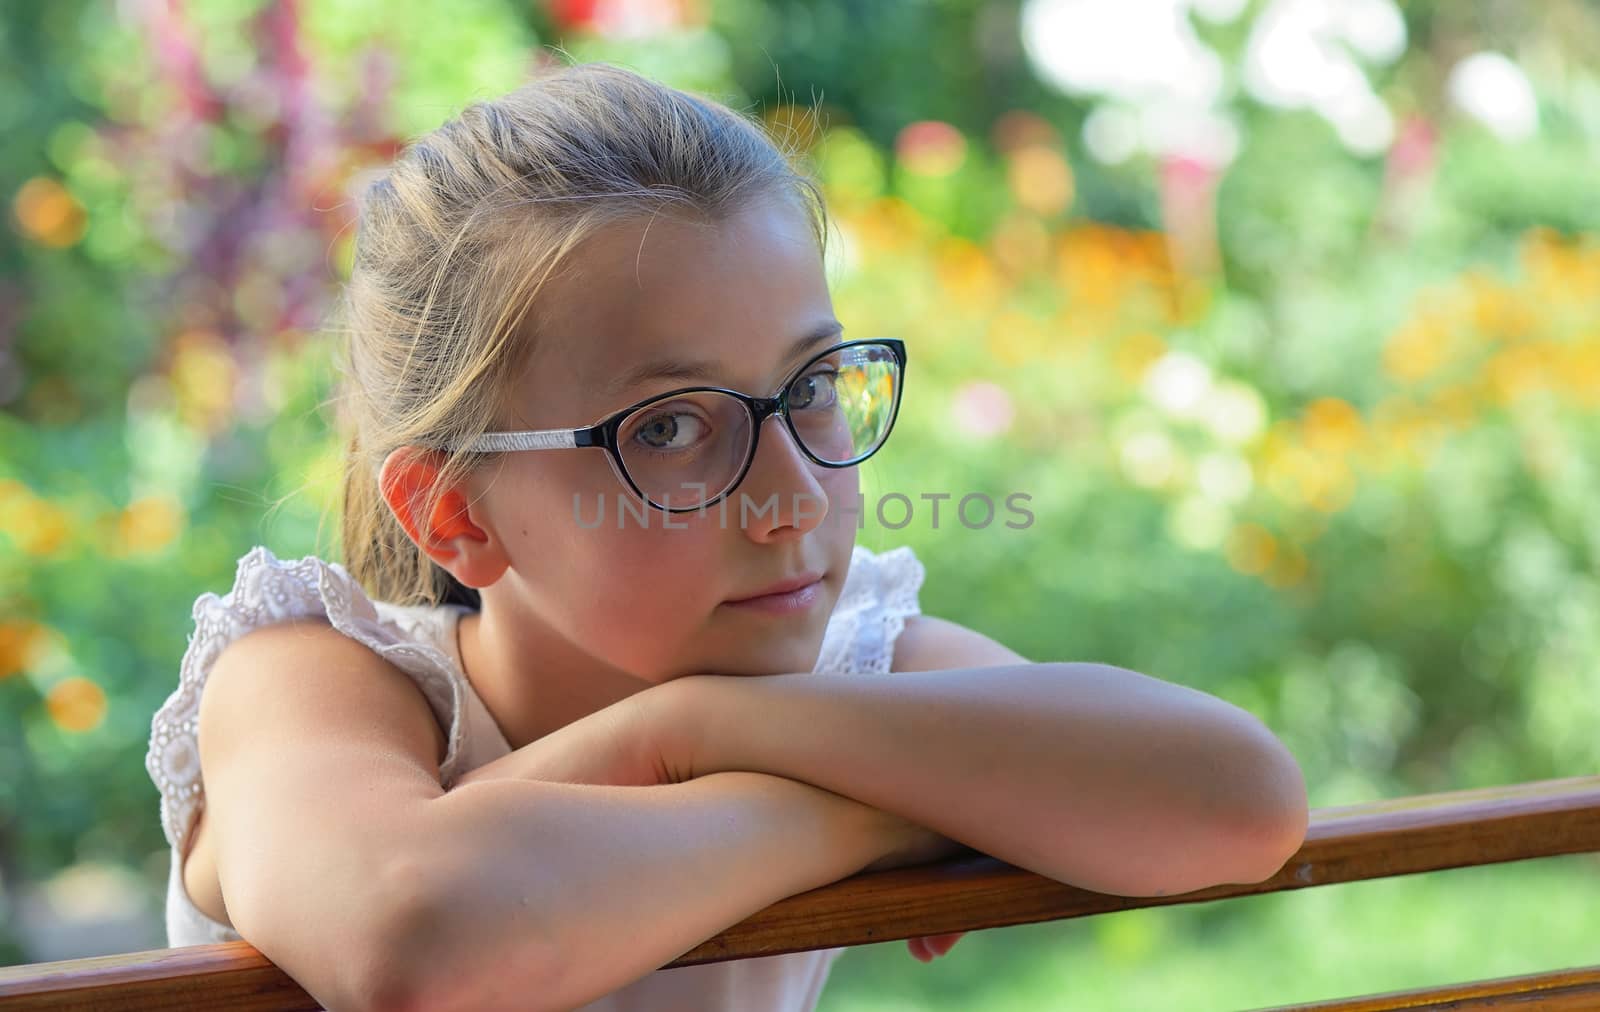 Thoughtful little girl by mady70